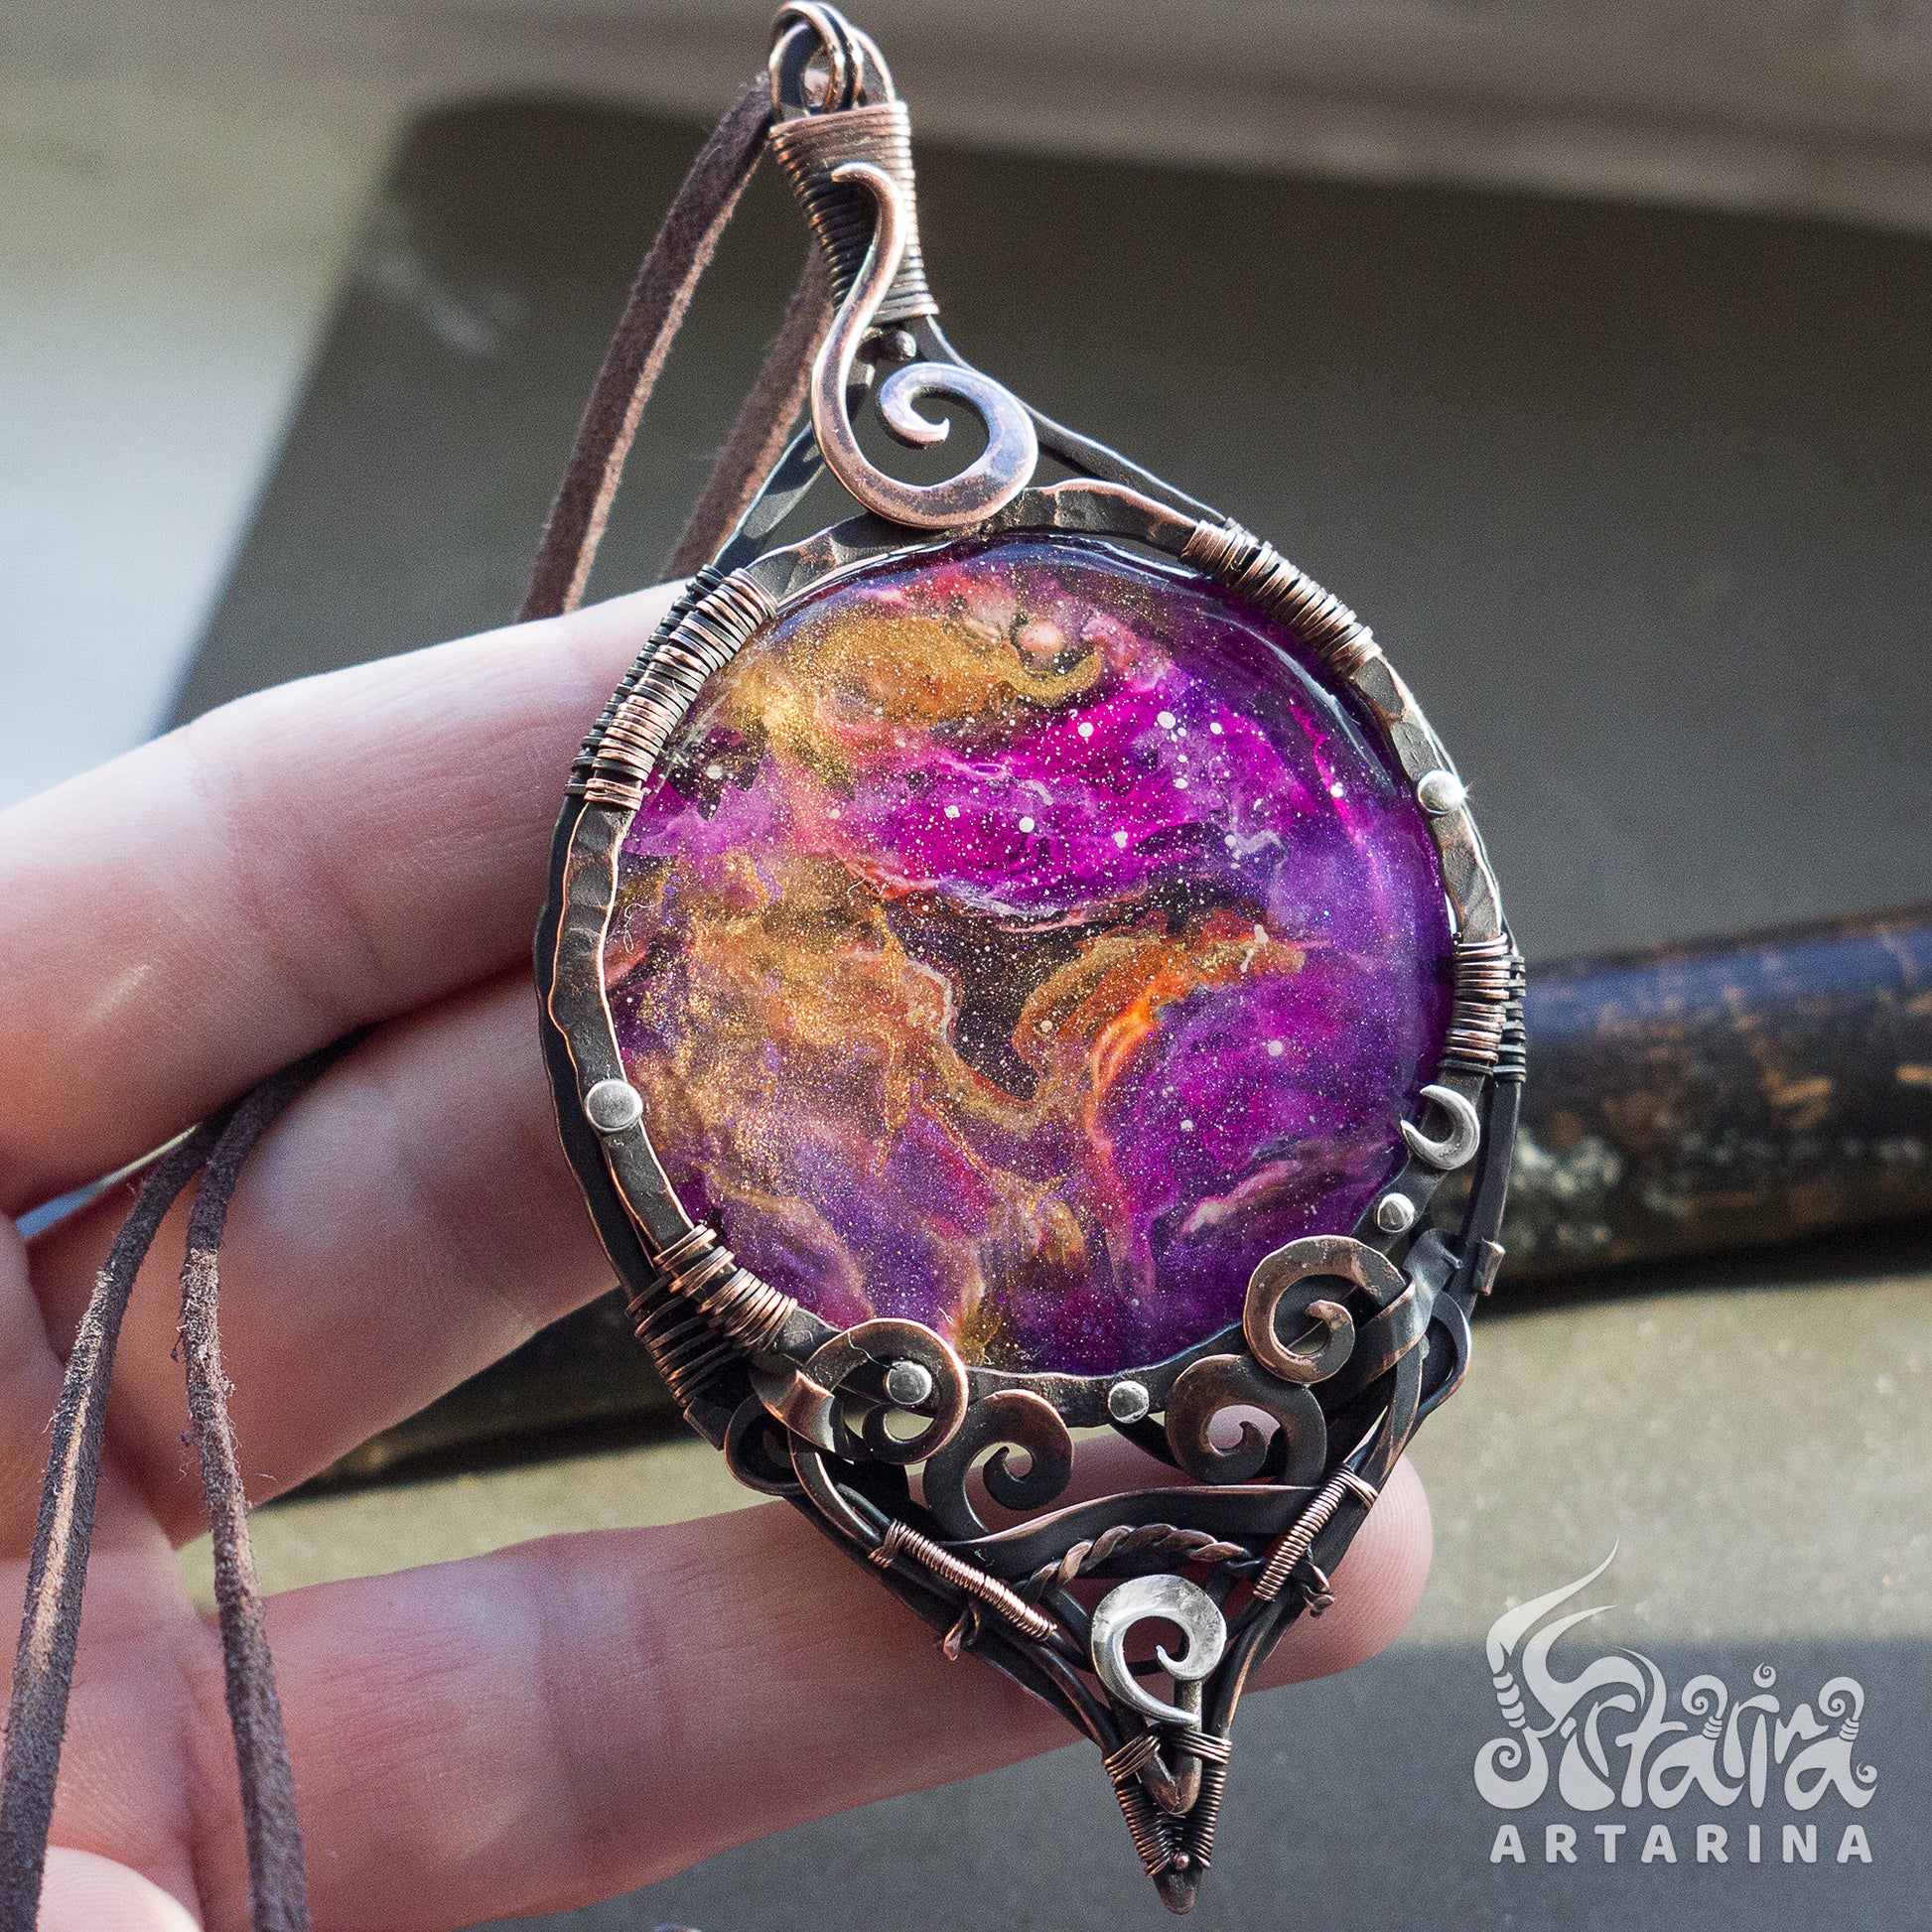 Handcrafted copper necklace featuring a stunning resin cabochon hand-painted to resemble a mesmerizing purple nebula in space pic 1